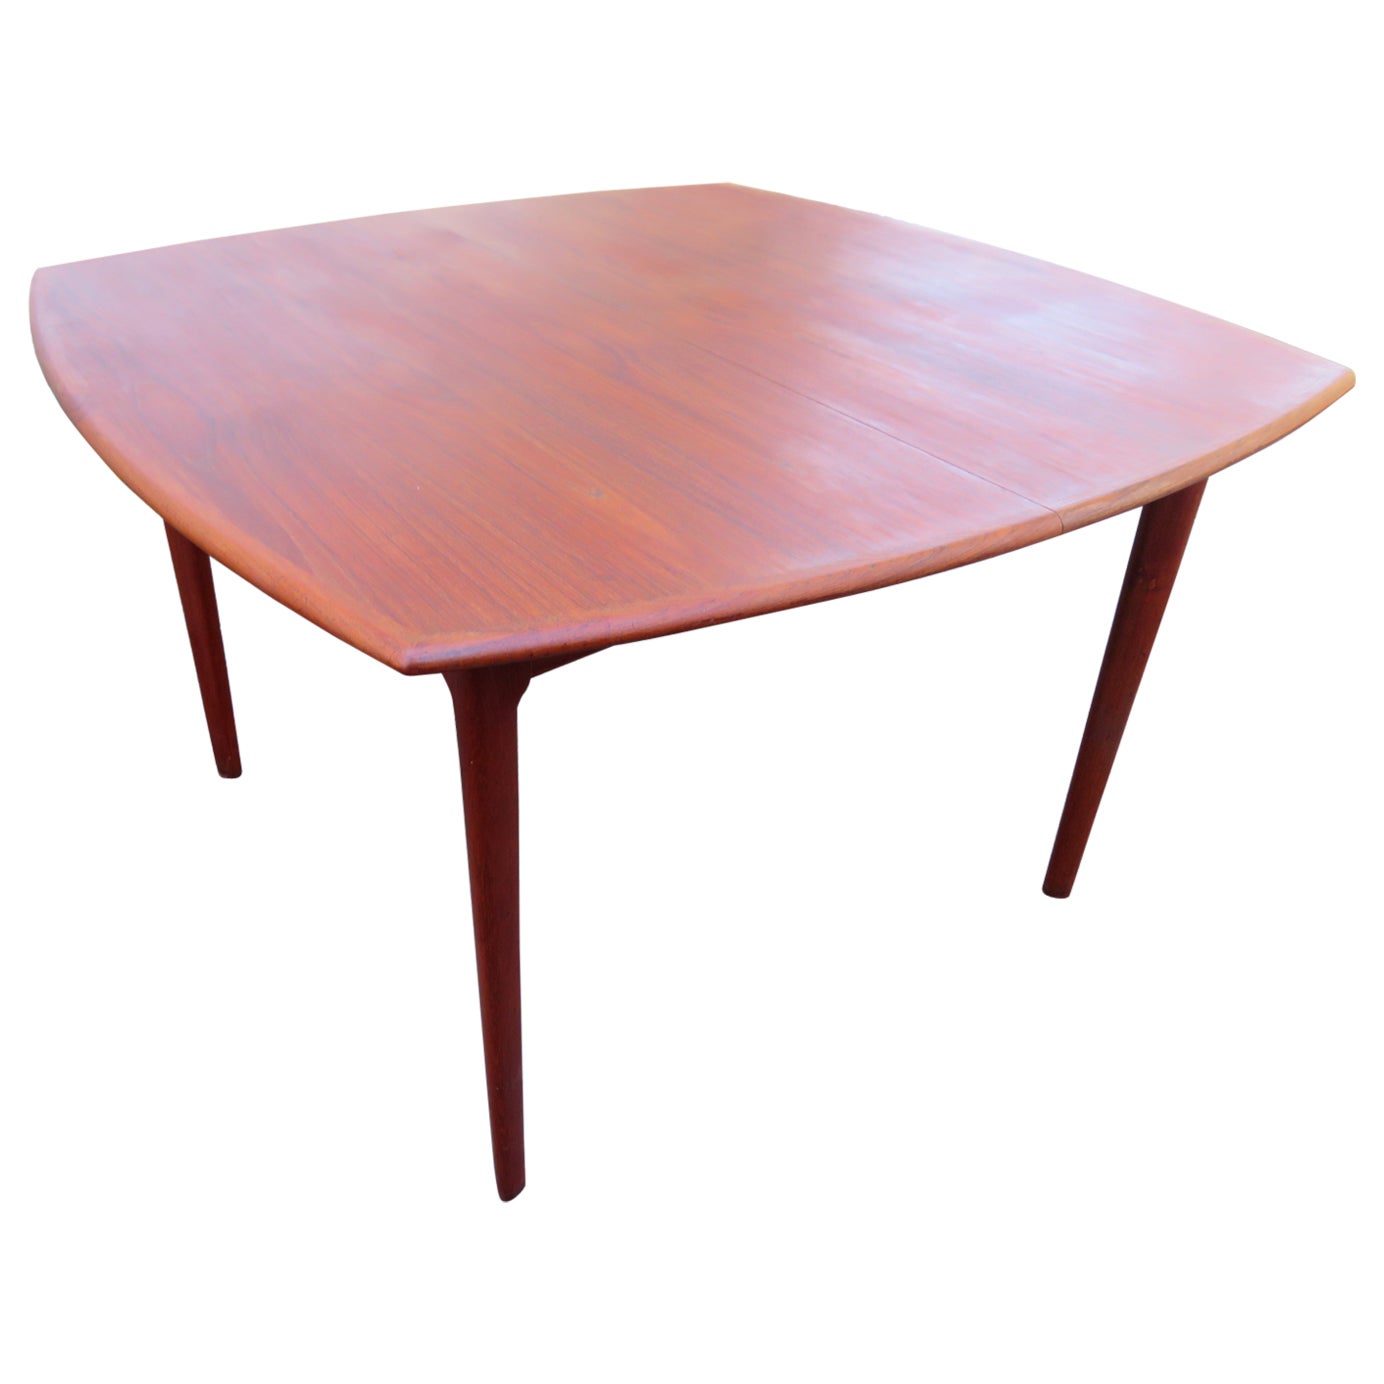 Handsome Danish Expandable Teak Dining Table by H. W. Klein for Bramin